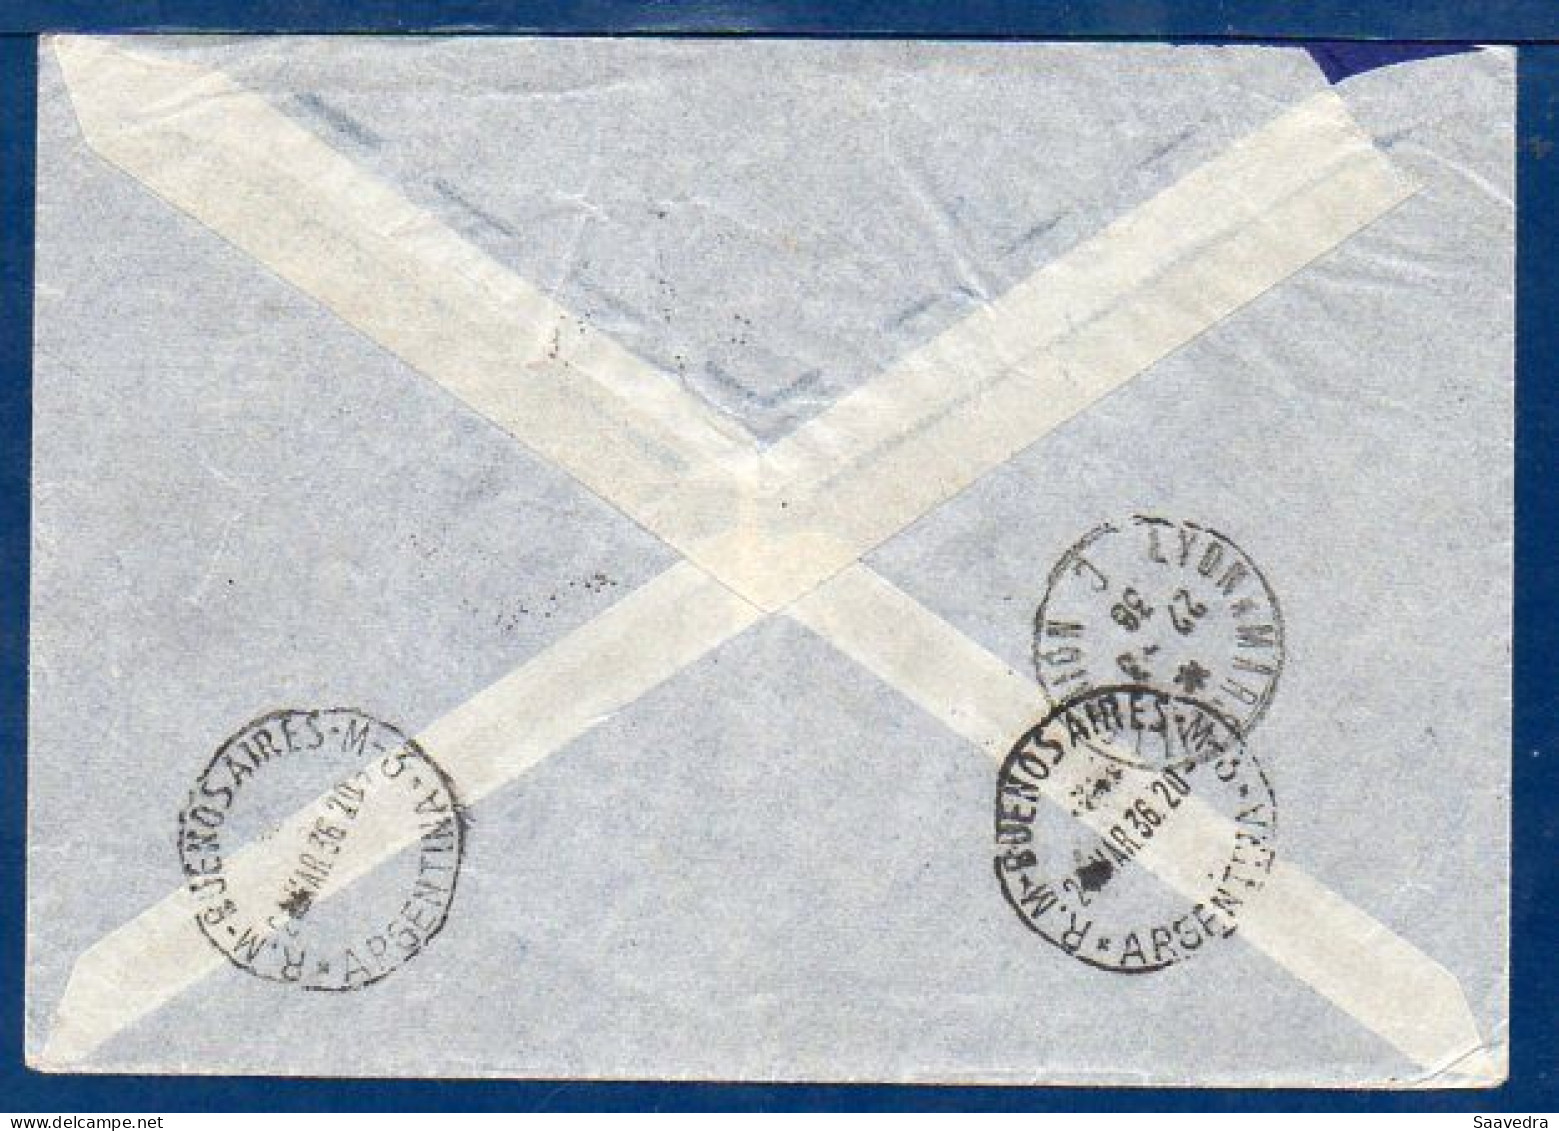 Switzerland To Argentina, 1936, Via Air France  (008) - Covers & Documents